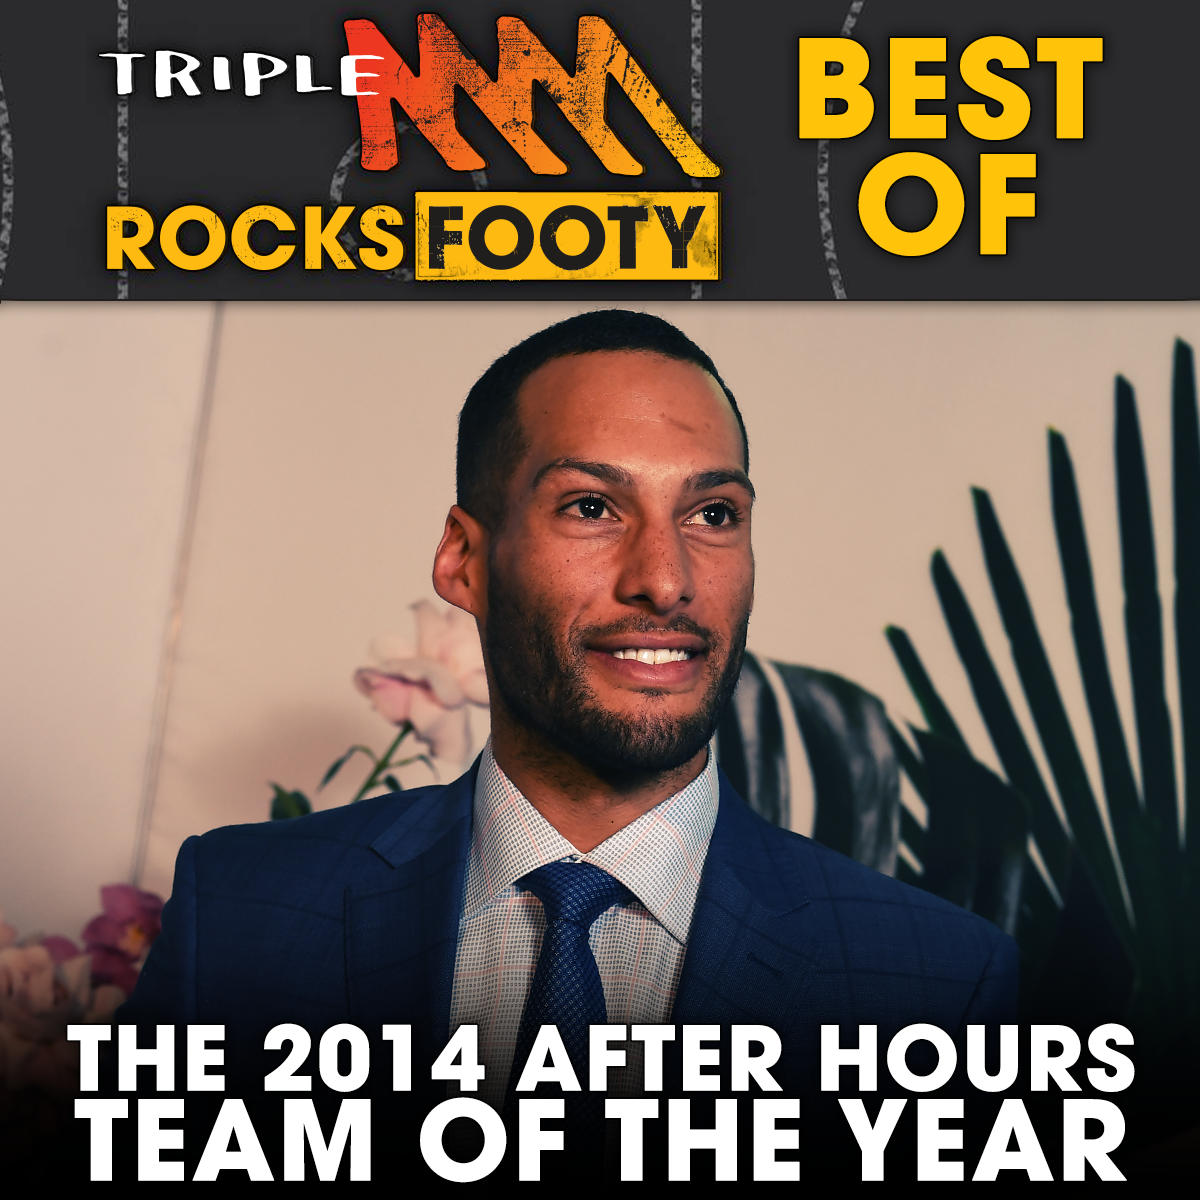 Triple M's 2014 After Hours Operators Team Of The Year